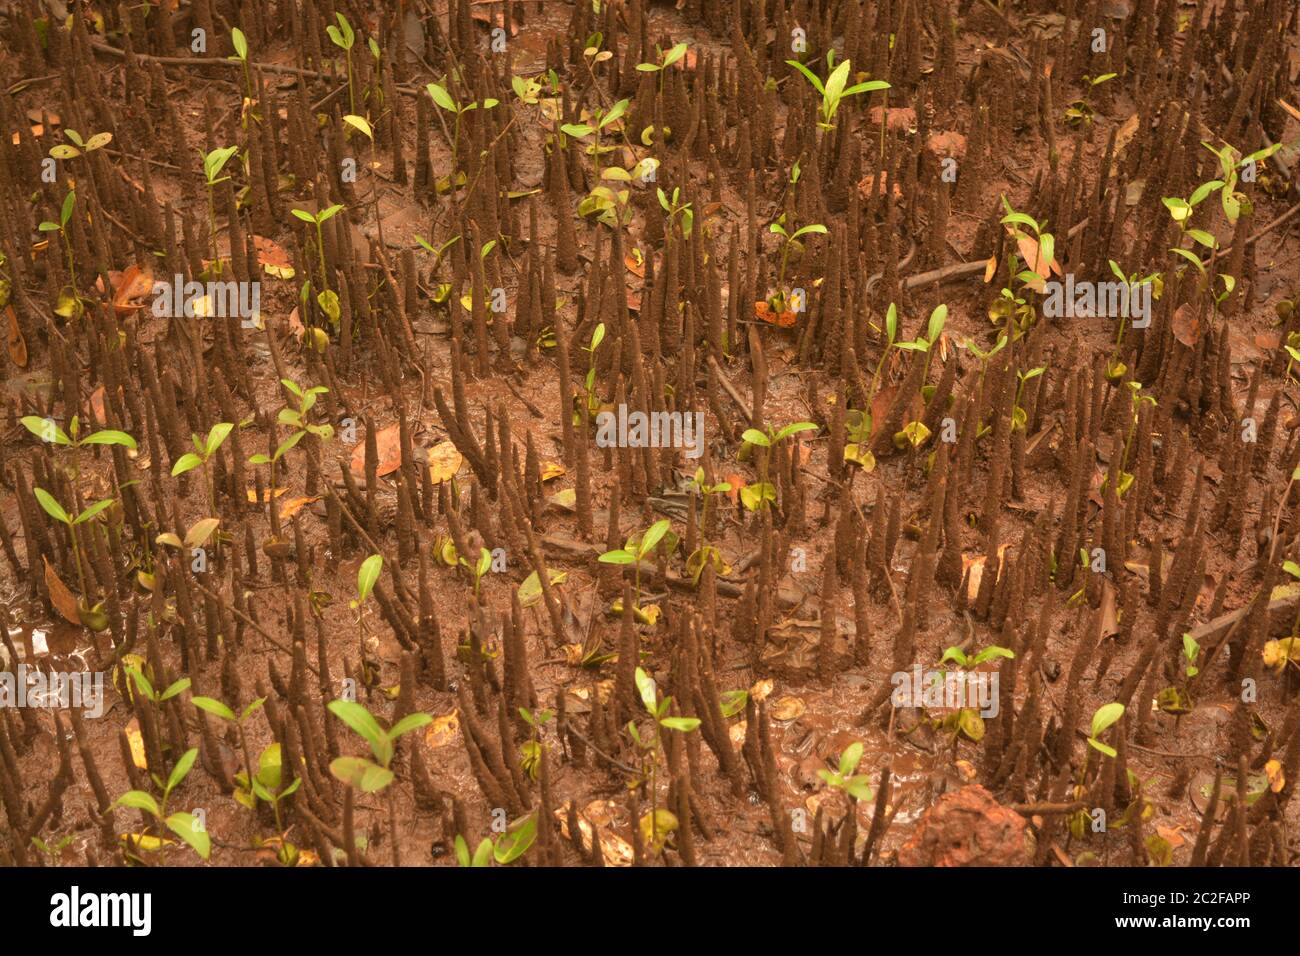 Mangrove breathing roots Stock Photo